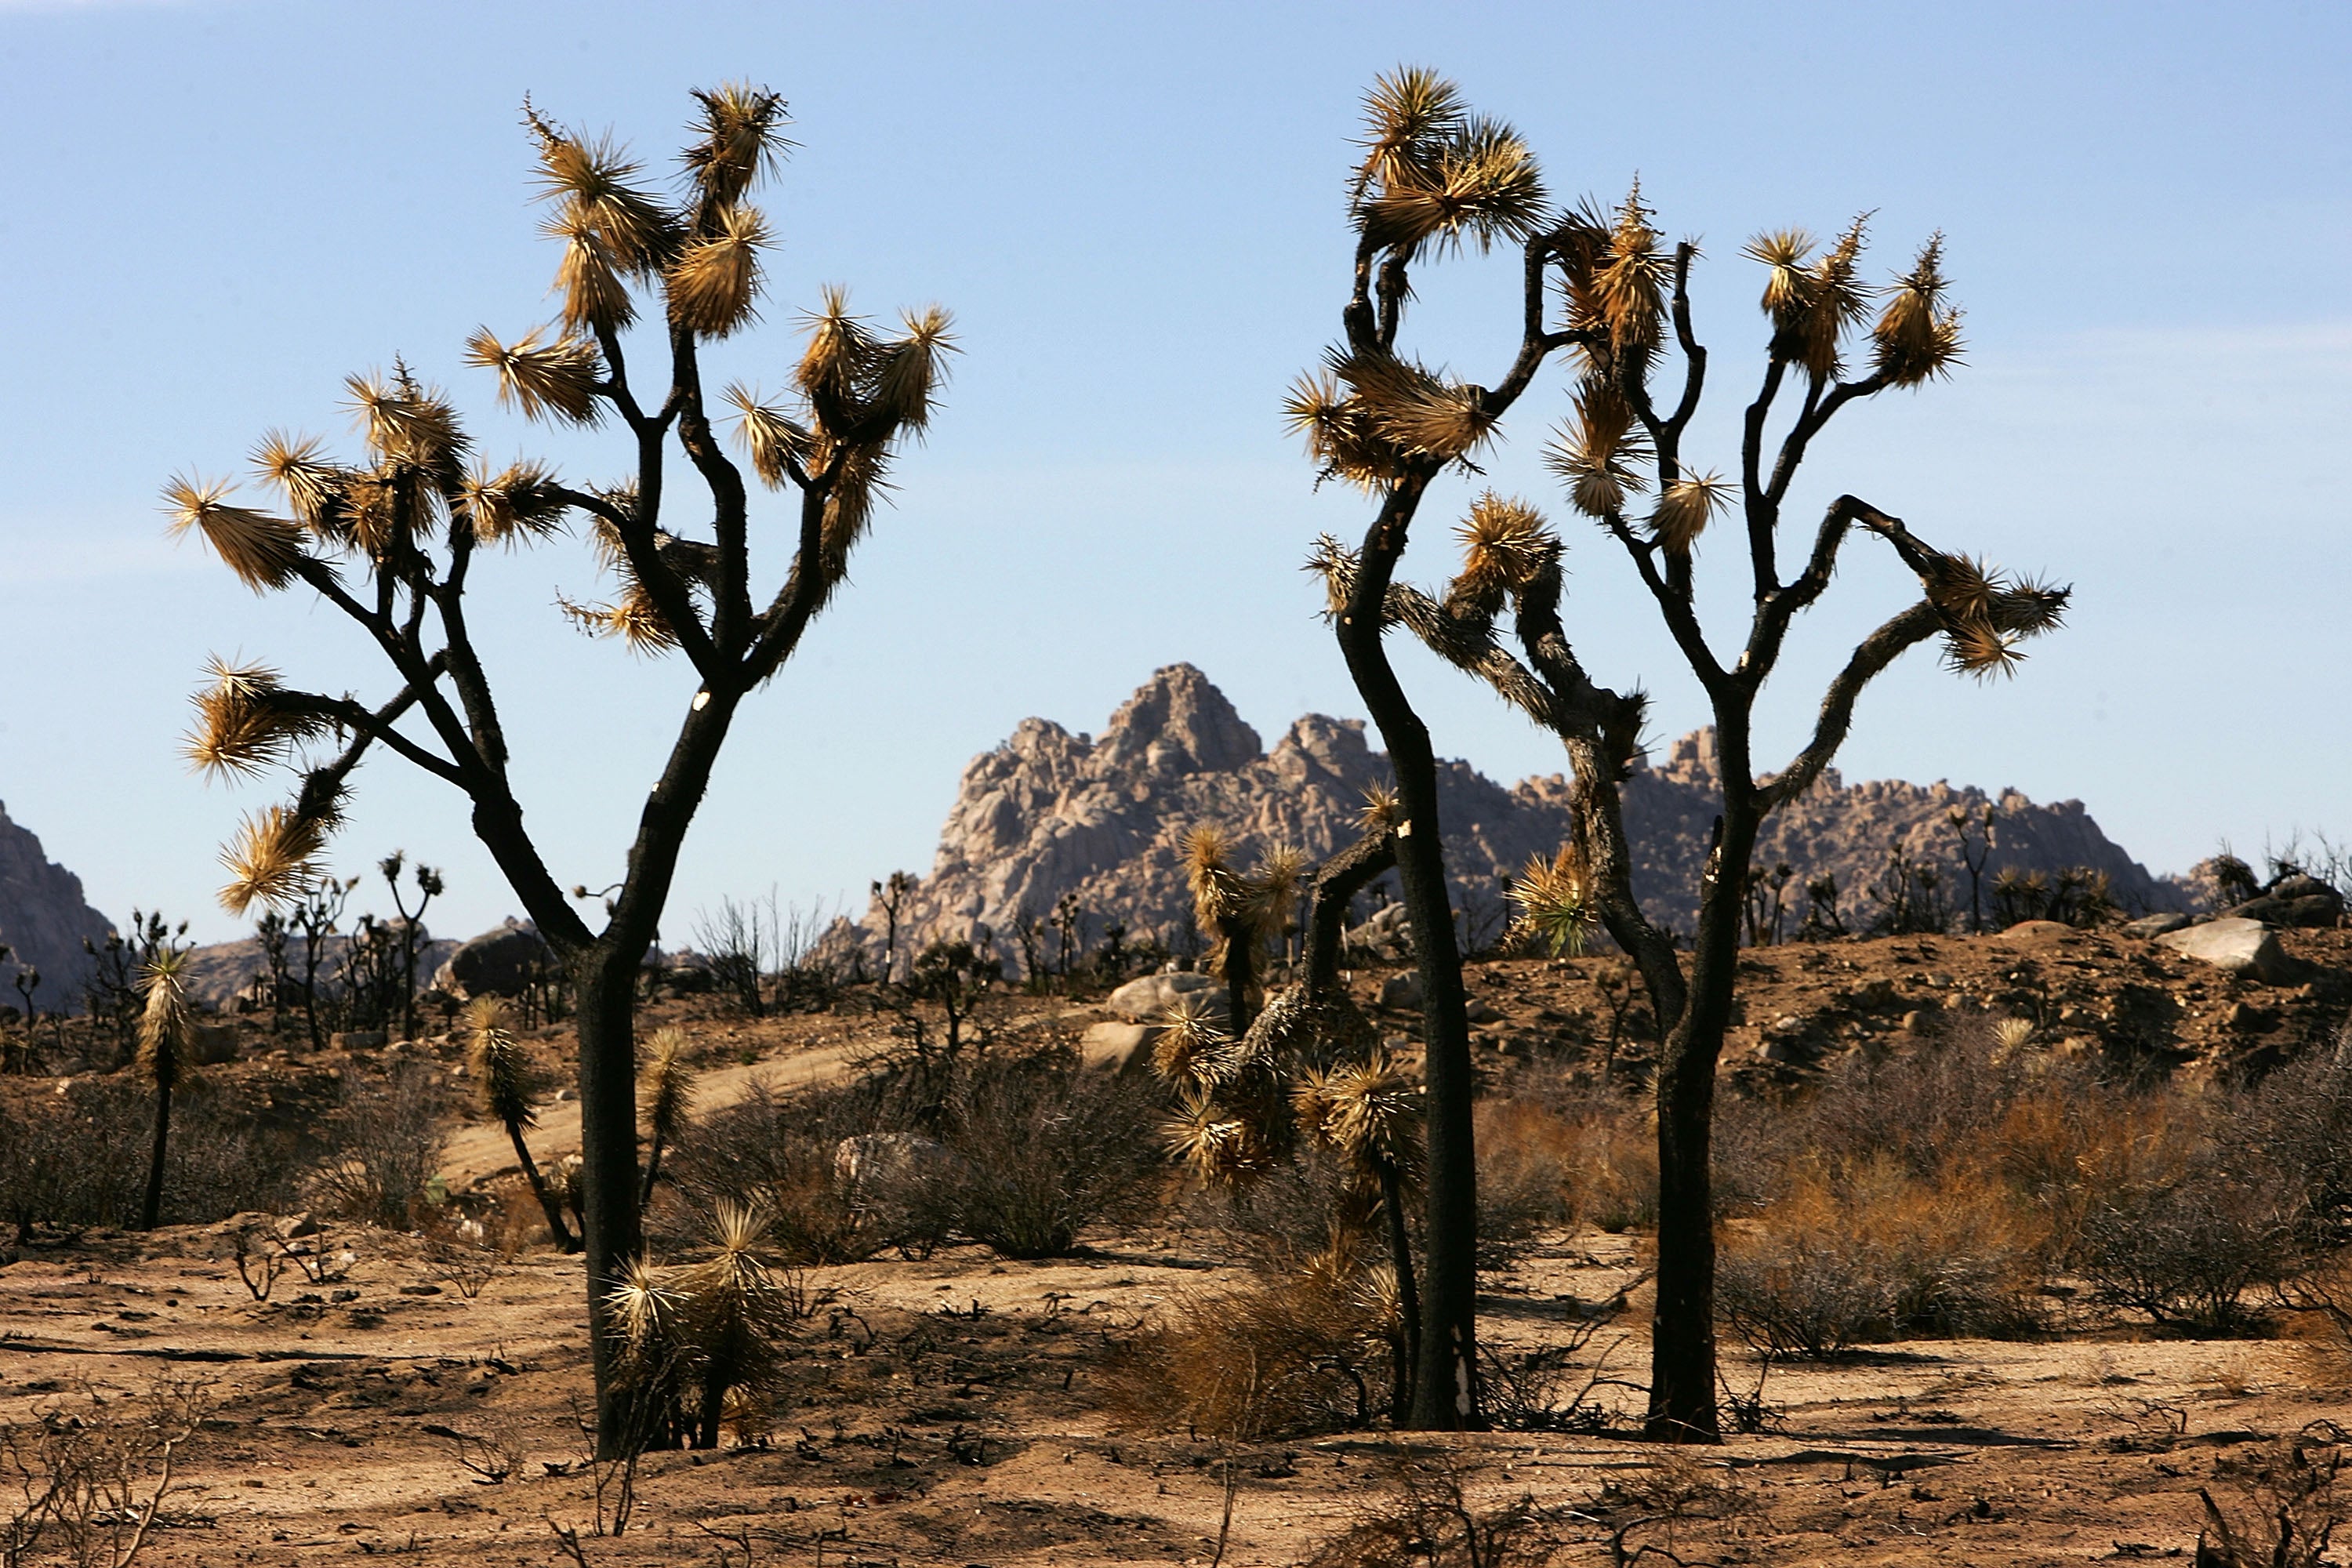 Joshua trees are protected under California state law as they are believed to be an endangered.